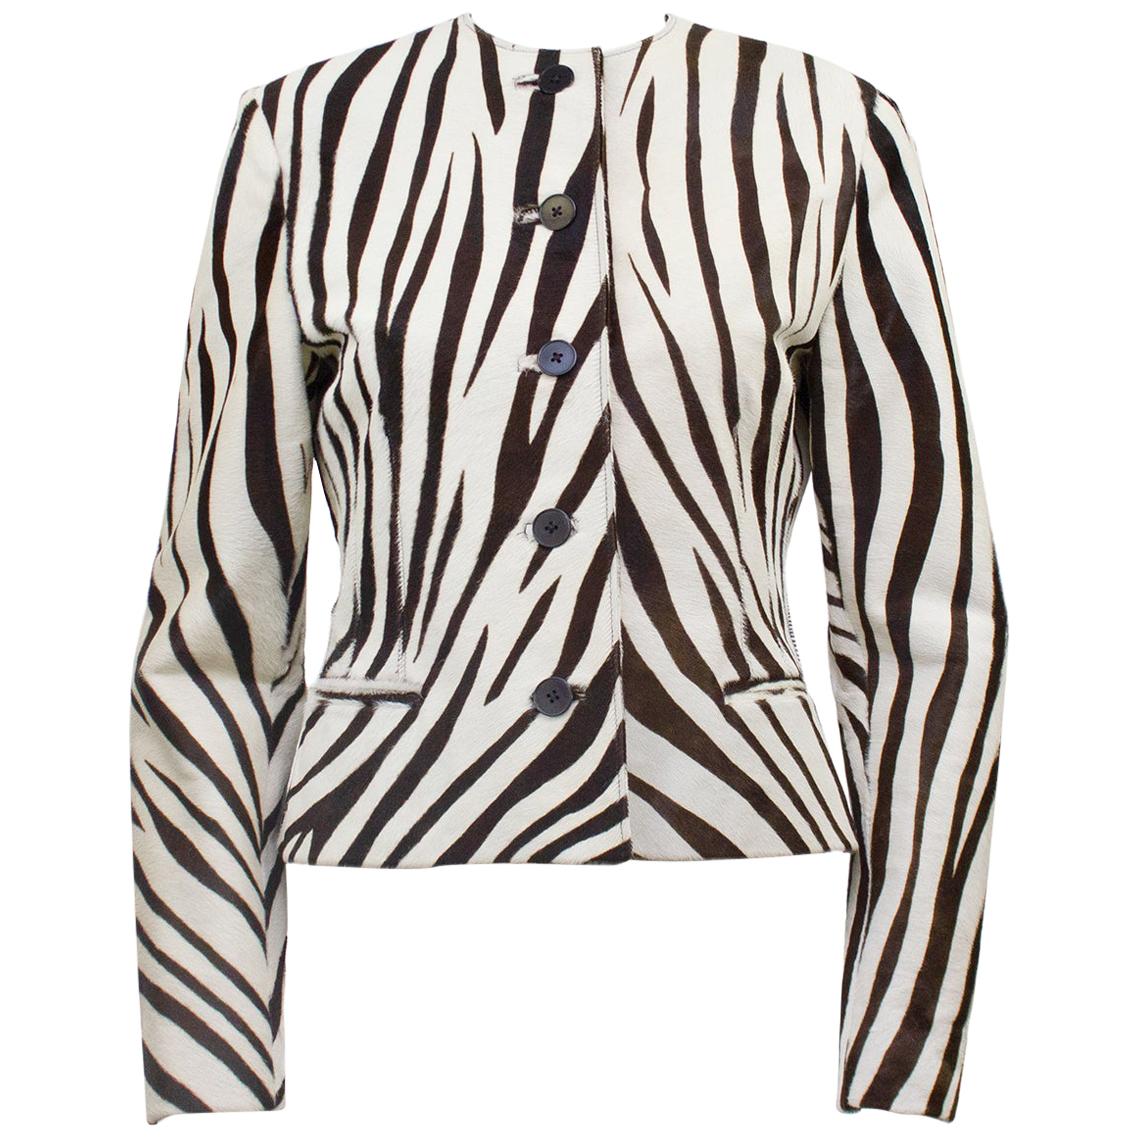 Stunning early 1990s Ralph Lauren Purple Label Collection Jacket. White and brown/black all over cow hide zebra print. Collarless with brown/black buttons and horizontal slit pockets. Cream lining. Excellent vintage condition - no wear to cow hide